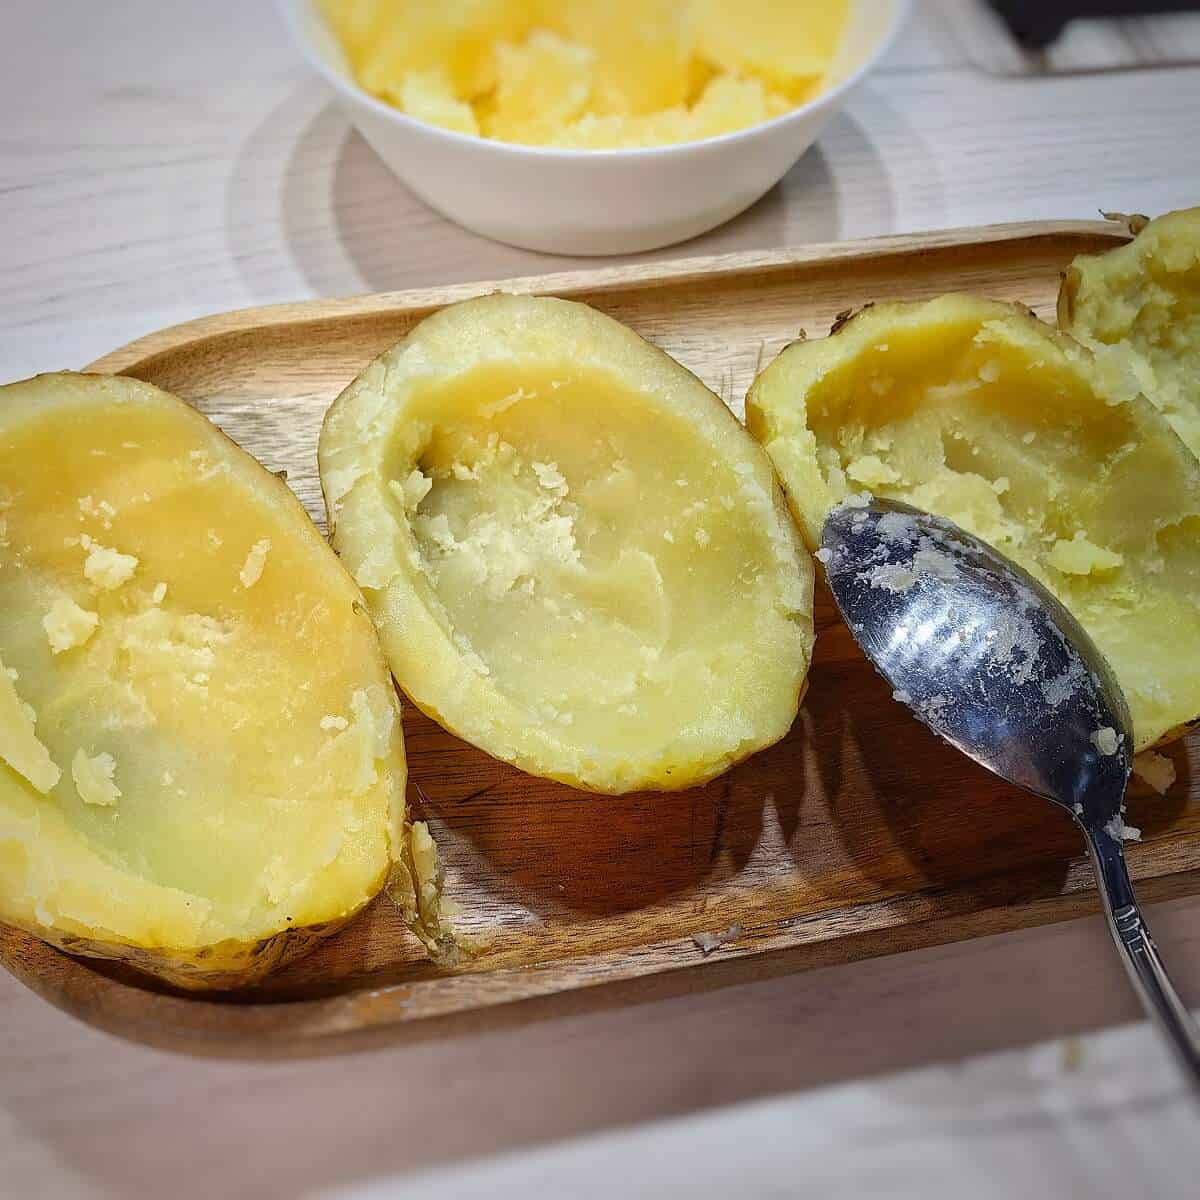 baked potatoes with insides scooped out